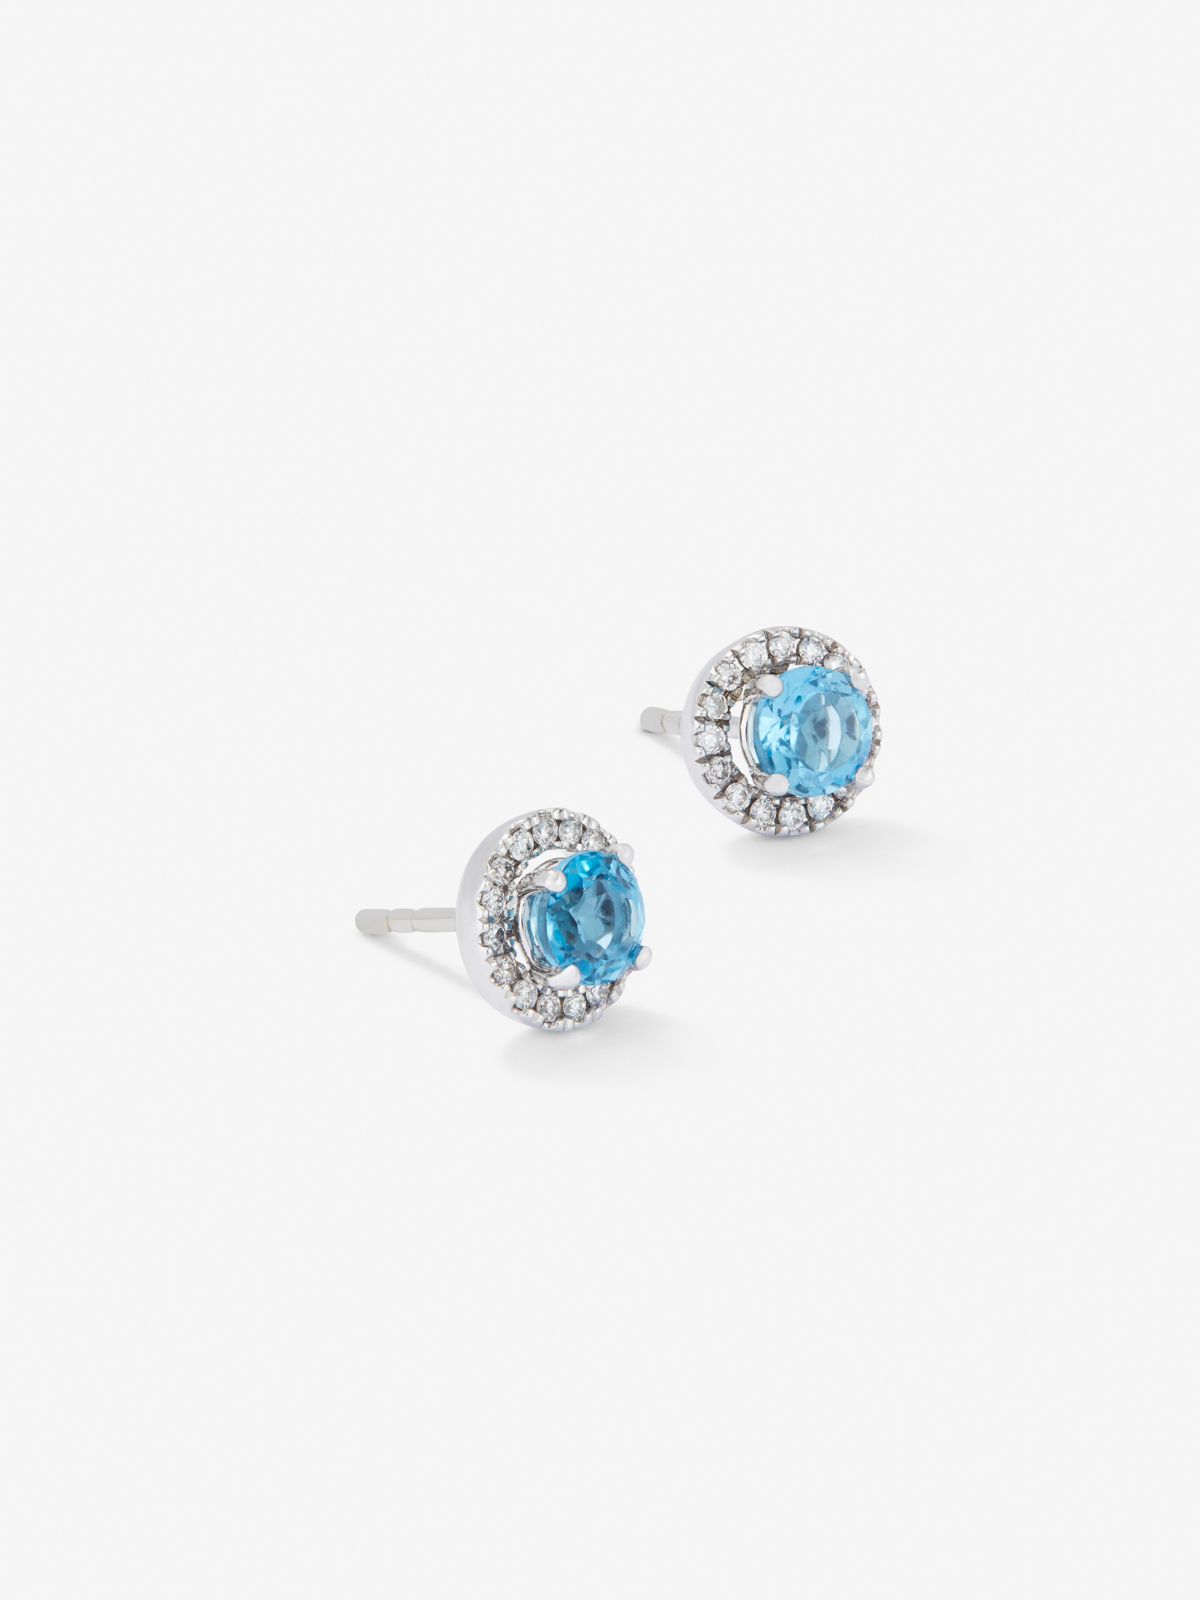 18K white gold earrings with 0.17 cts diamonds and swiss blue 1.26cts